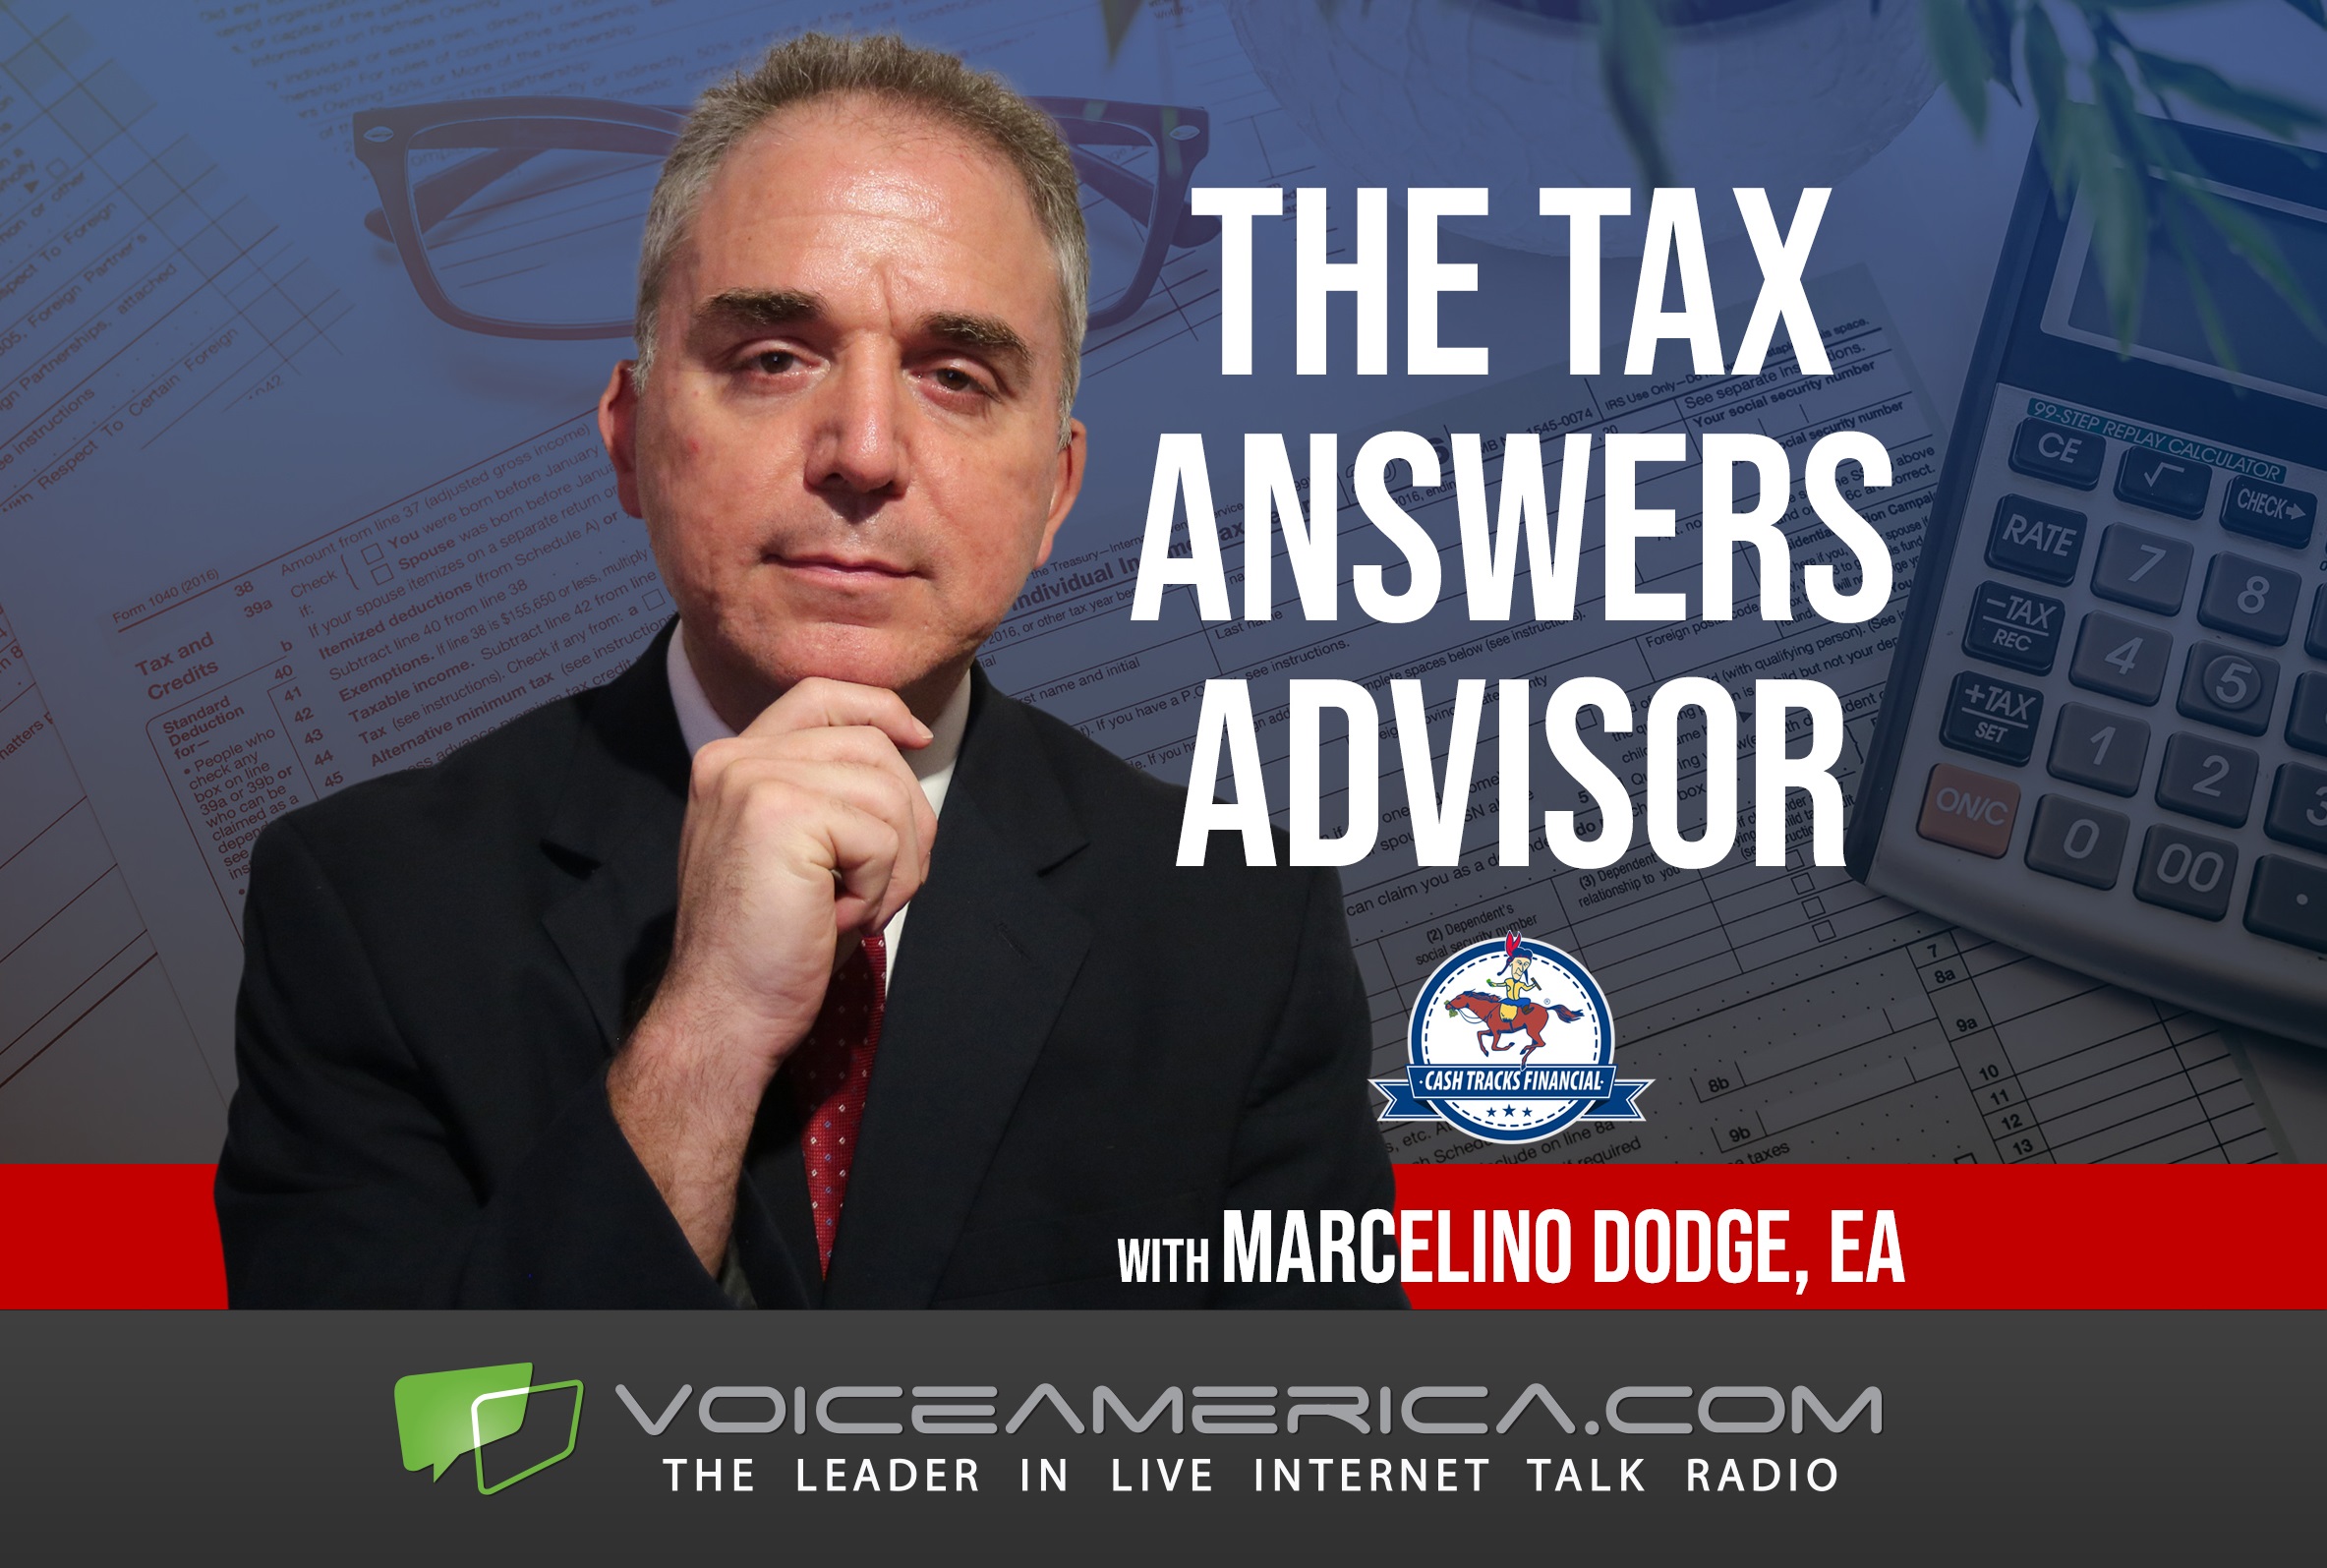 IRS liens, levies, and offers to settle your tax debt. Is it really that easy? Listen on demand to The Tax Answers Advisor on the VoiceAmerica.com Business Channel. https://www.voiceamerica.com/episode/138788/should-an-additional-80000-irs-agents-be-of-concern-to-you